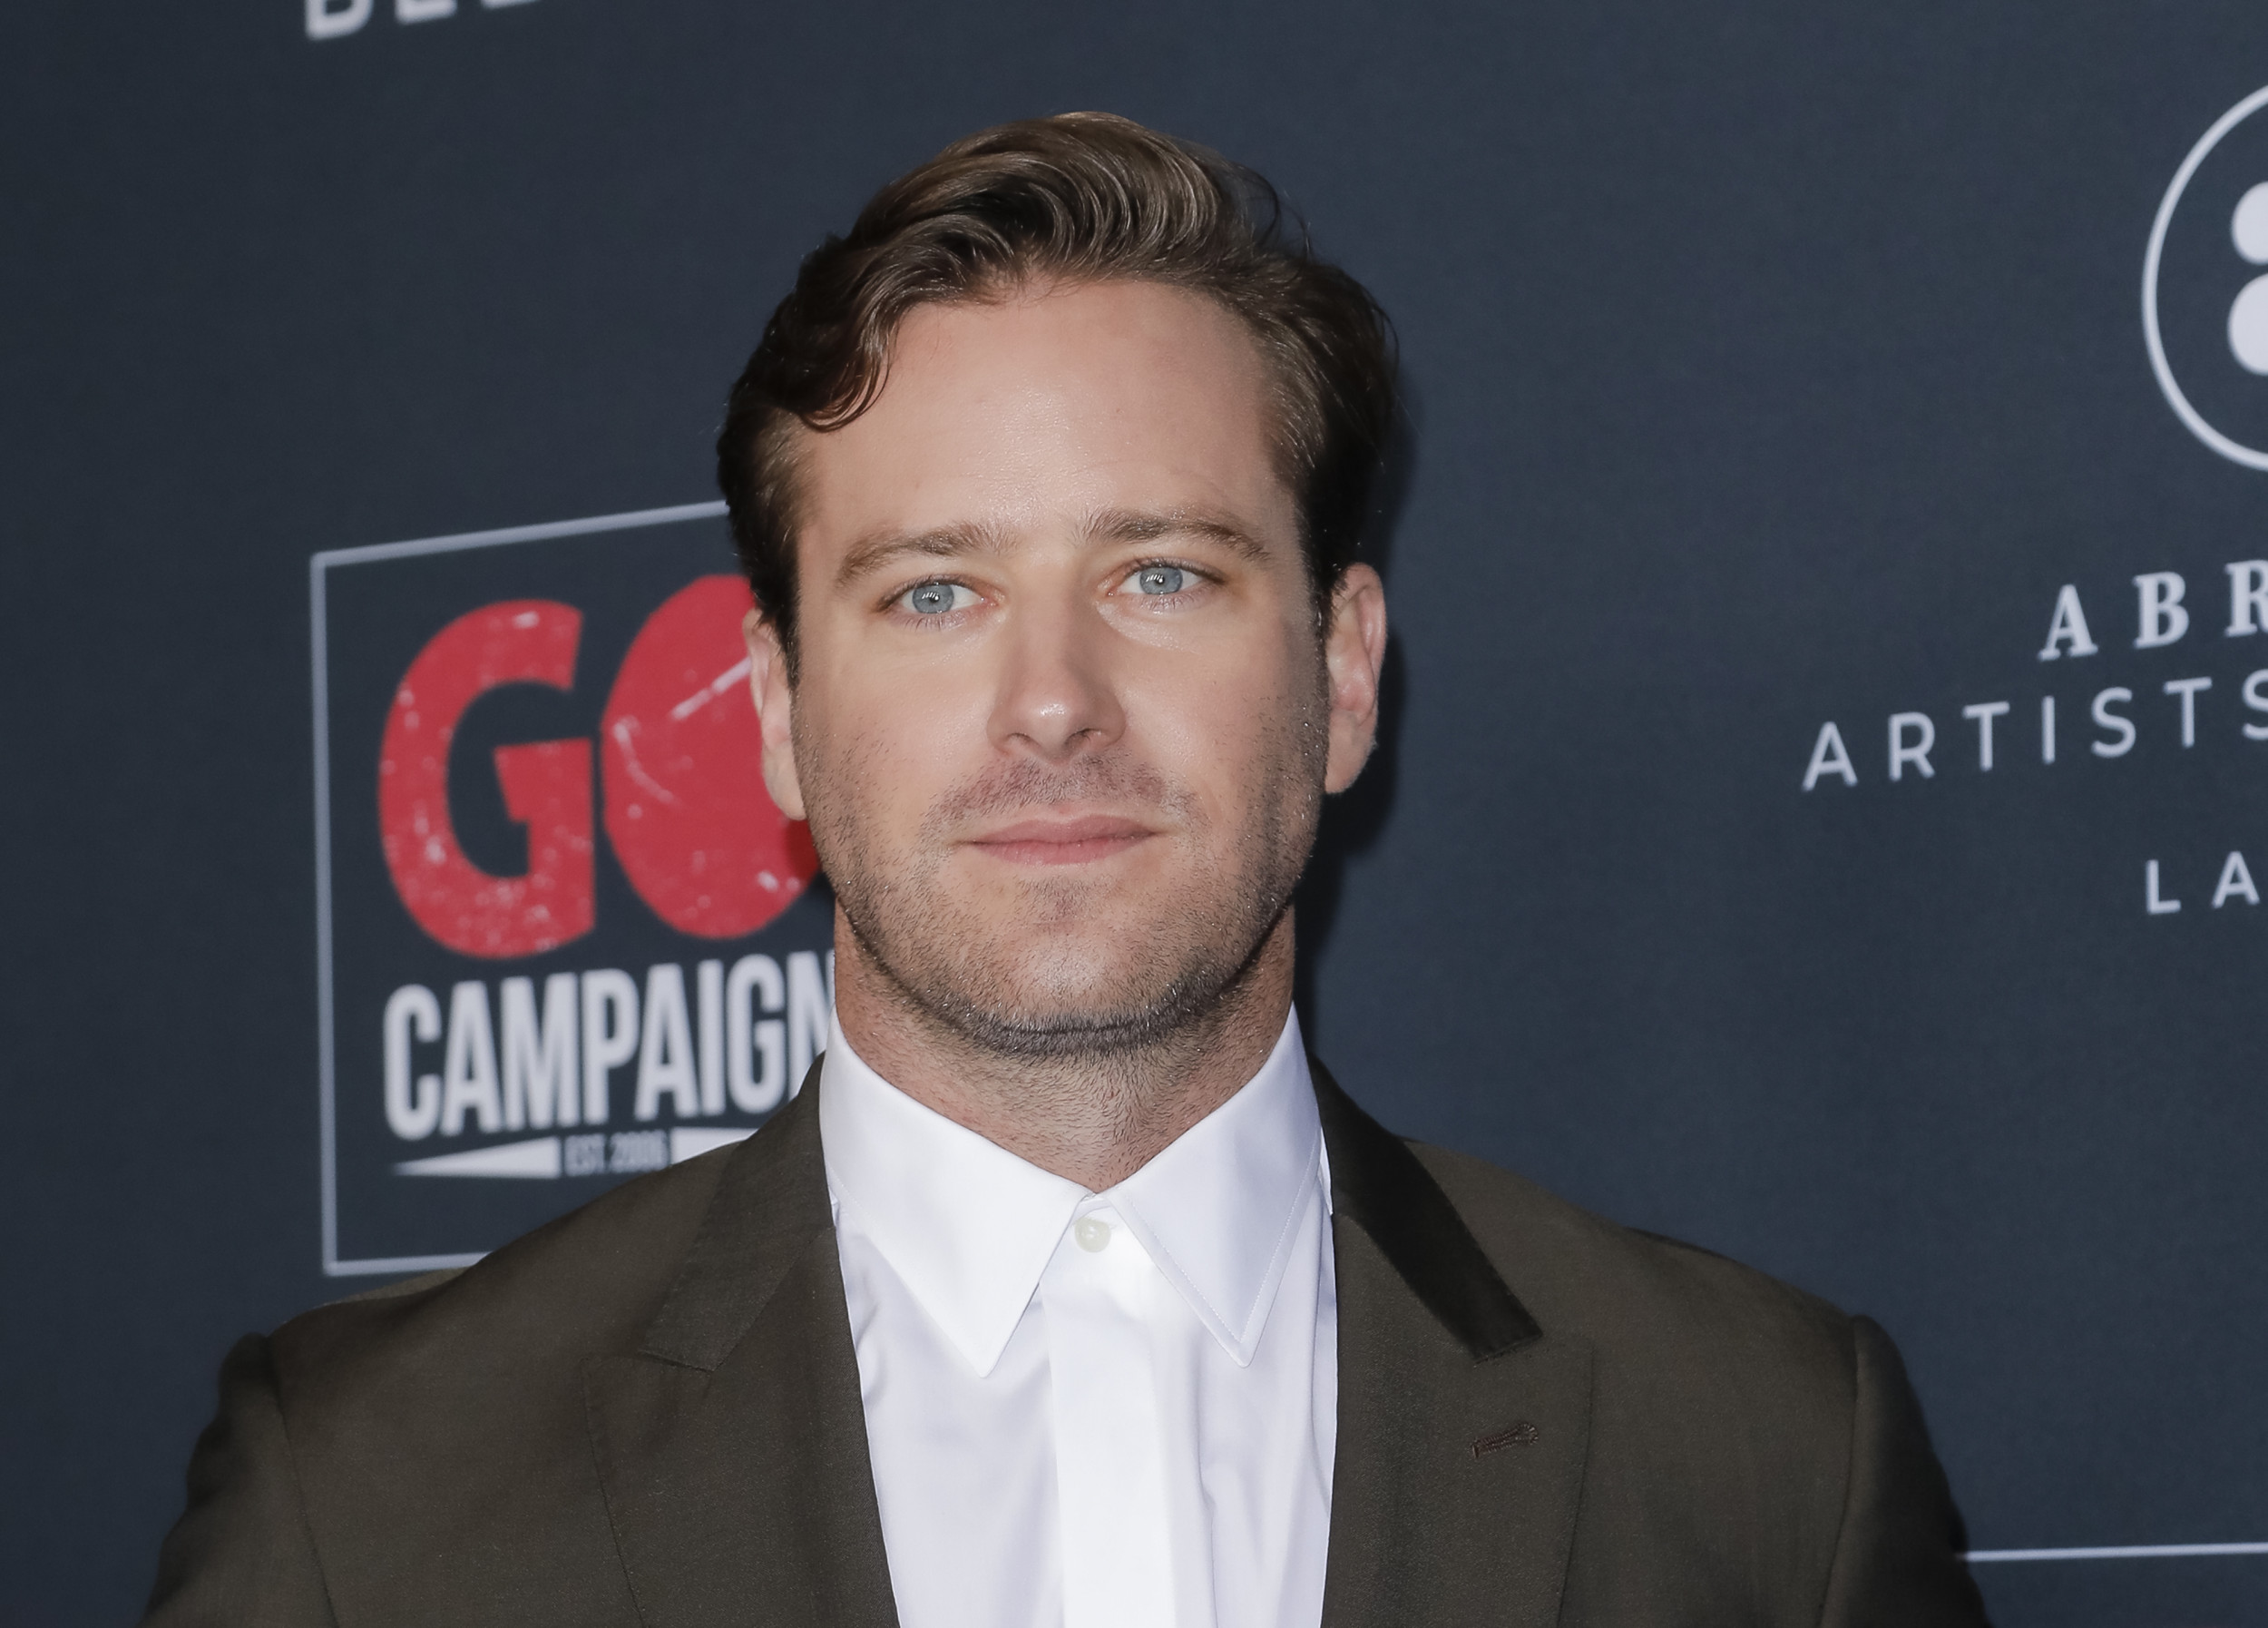 Armie Hammer Cannibalism, Abuse Allegations Resurface Ahead of Documentary